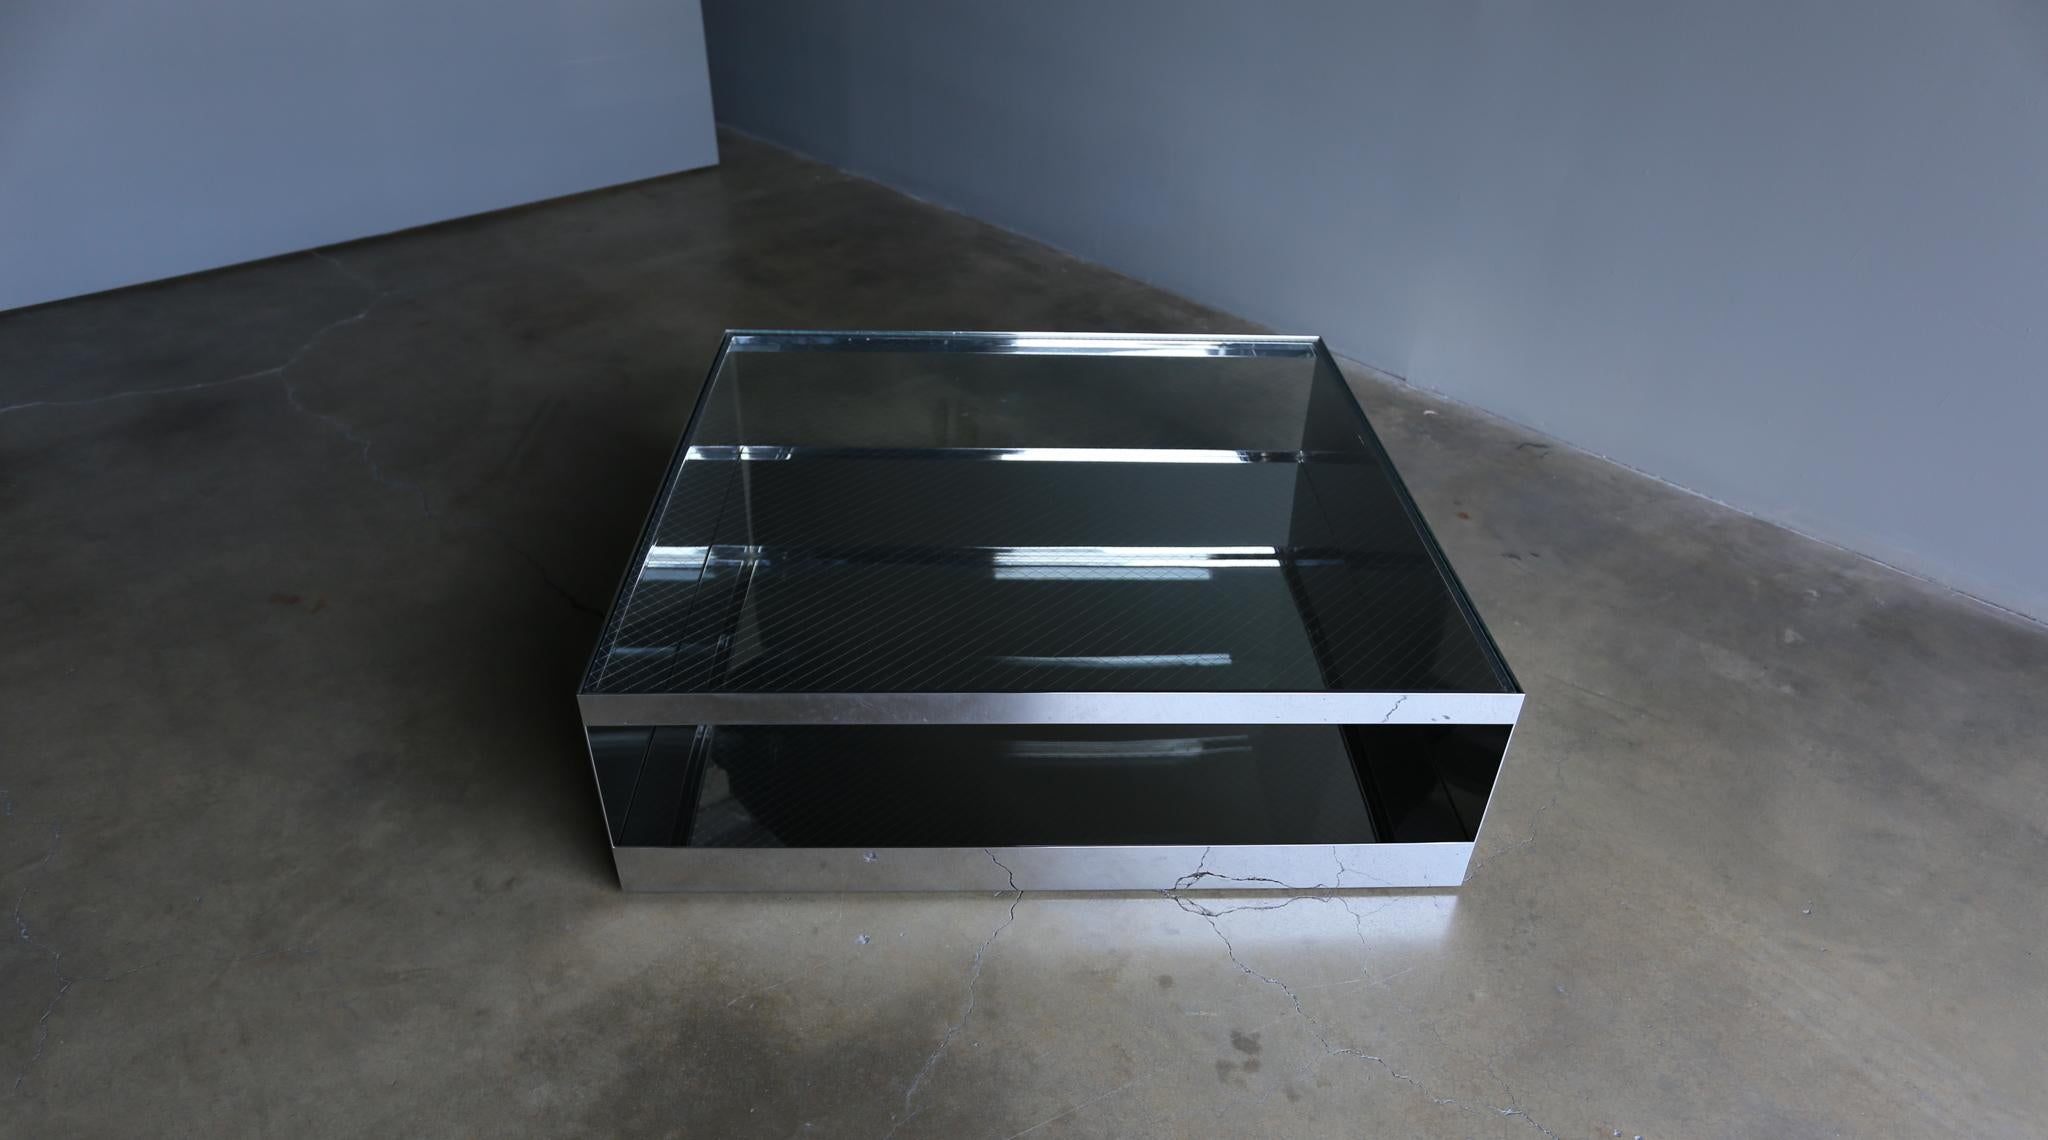 Joe D'urso polished stainless steel & safety glass coffee table for Knoll, circa 1981.

This piece has been professionally polished. The table rolls on hidden castors.